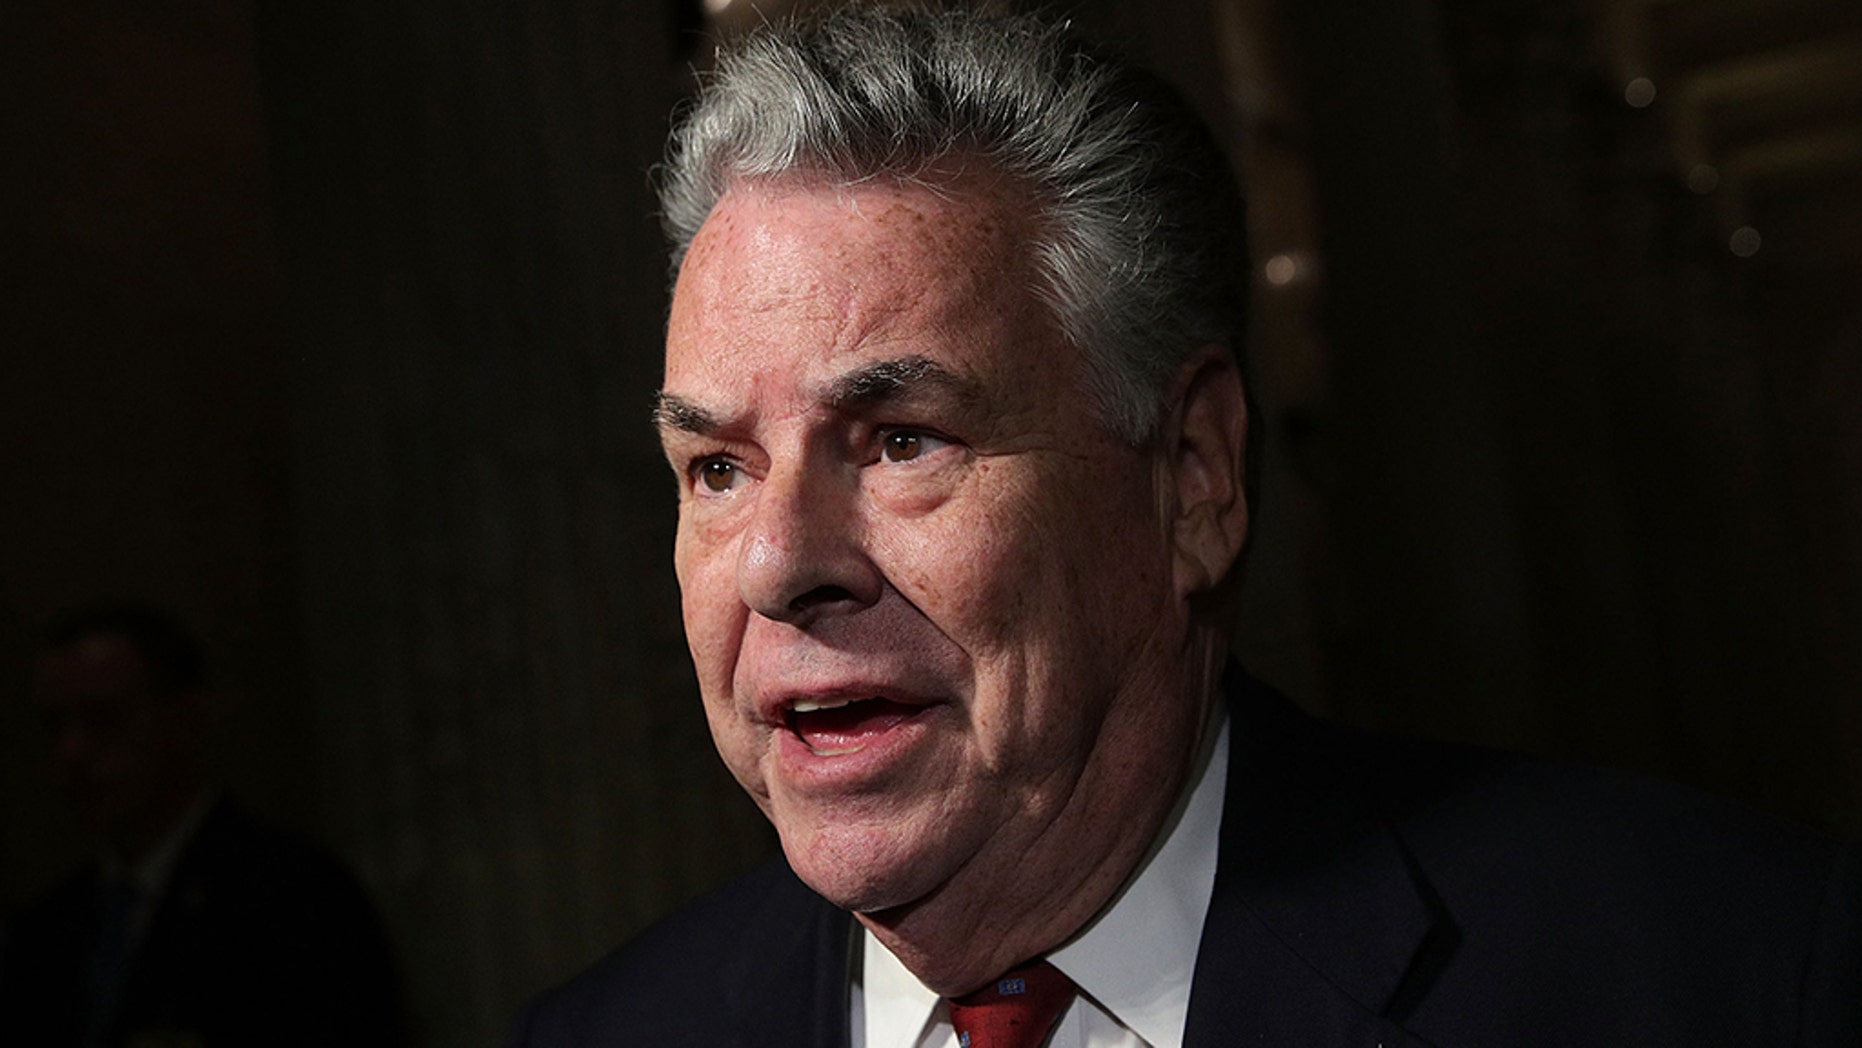 As the issue of impeachment proceedings plagues the Democratic party, Rep. Peter King, R-N.Y., said that as a Republican, he wants them to continue with discussions, but as an American, knows its the wrong decision